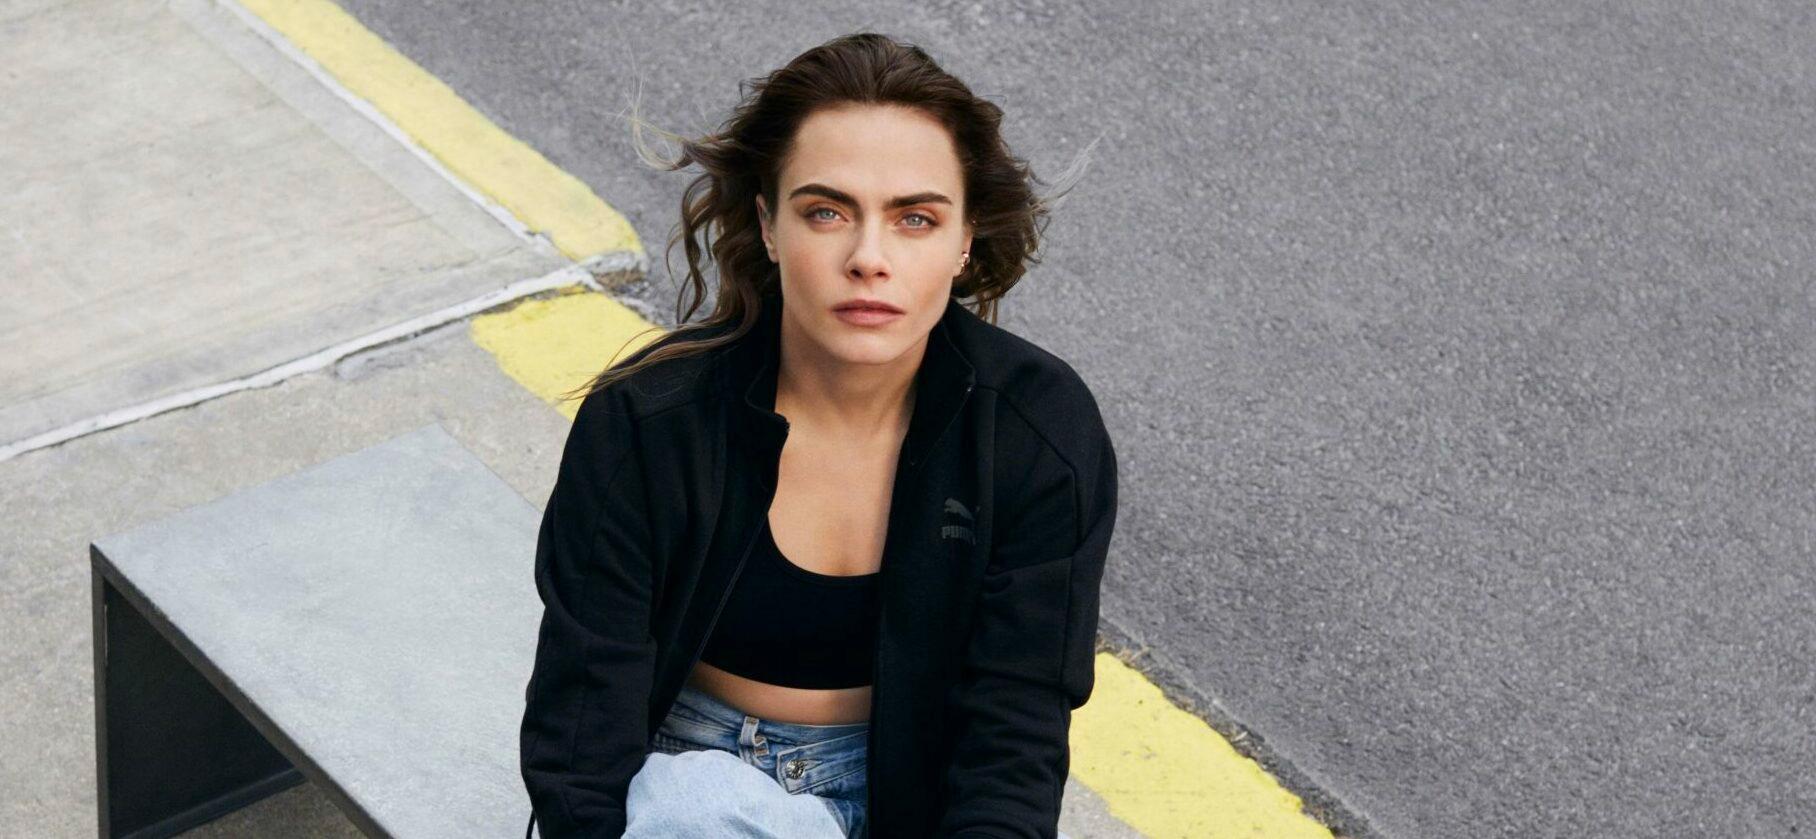 Cara Delevingne is set to host an event to help create a more sustainable fashion industry.